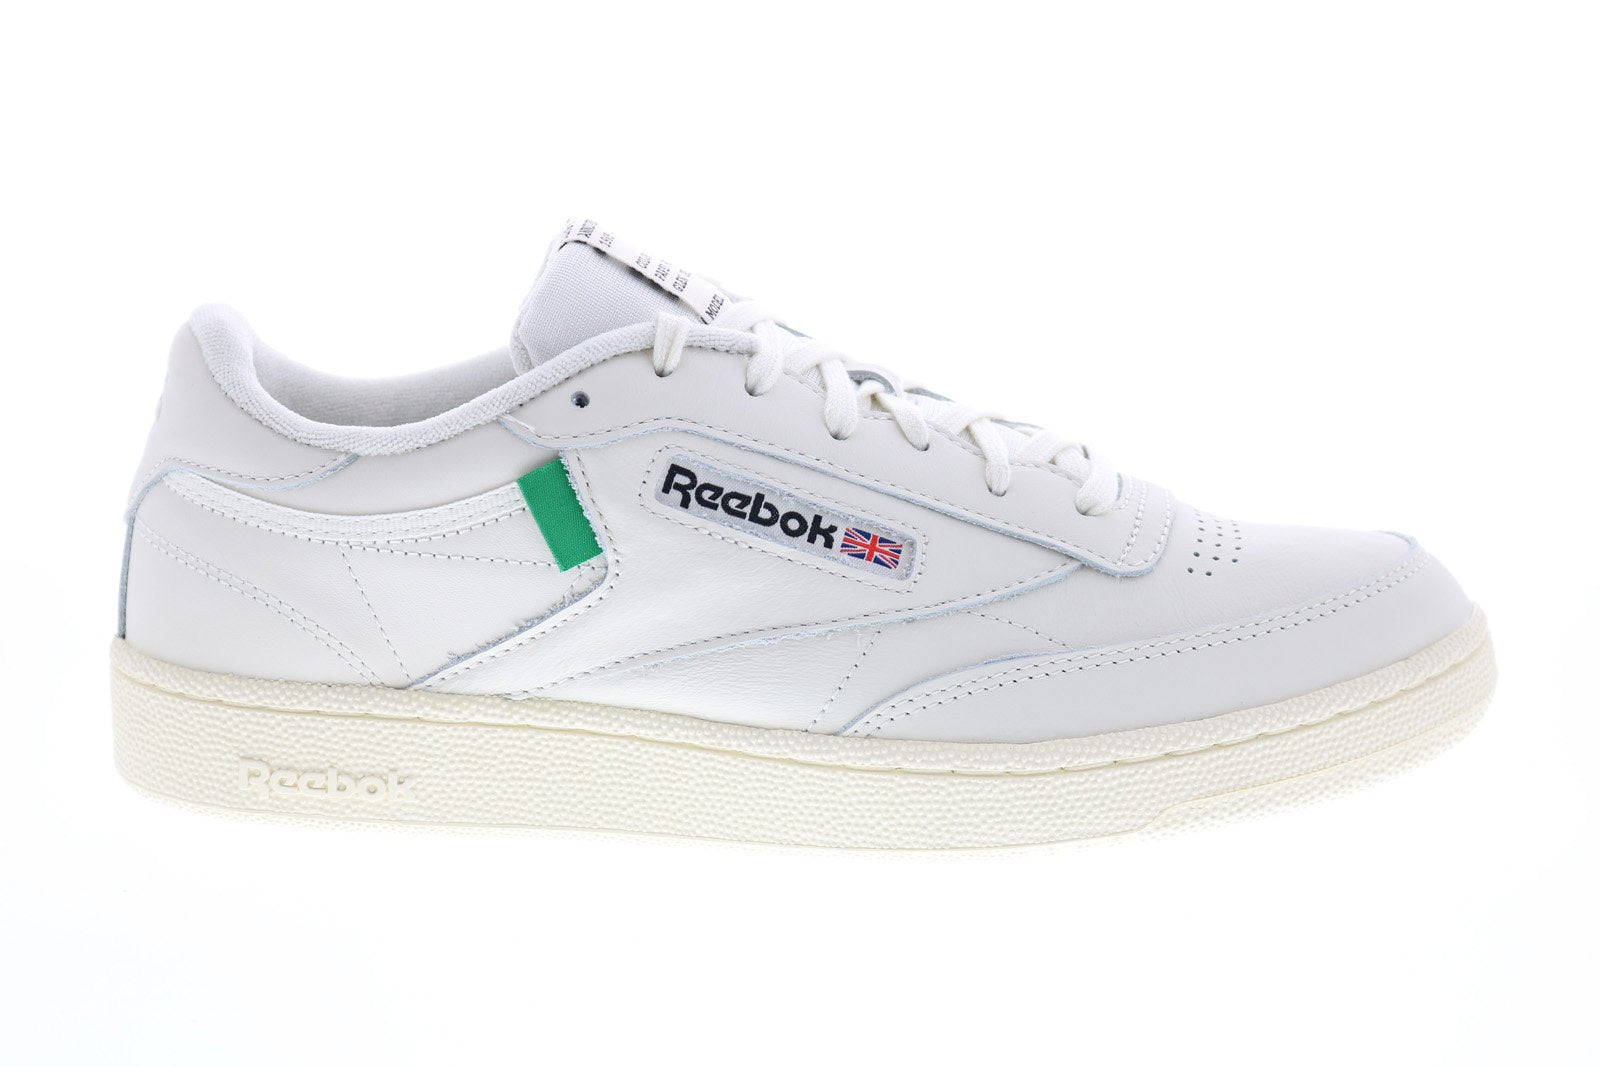 Reebok Club C 85 FX1378 Mens White Leather Lifestyle Sneakers Shoes ...